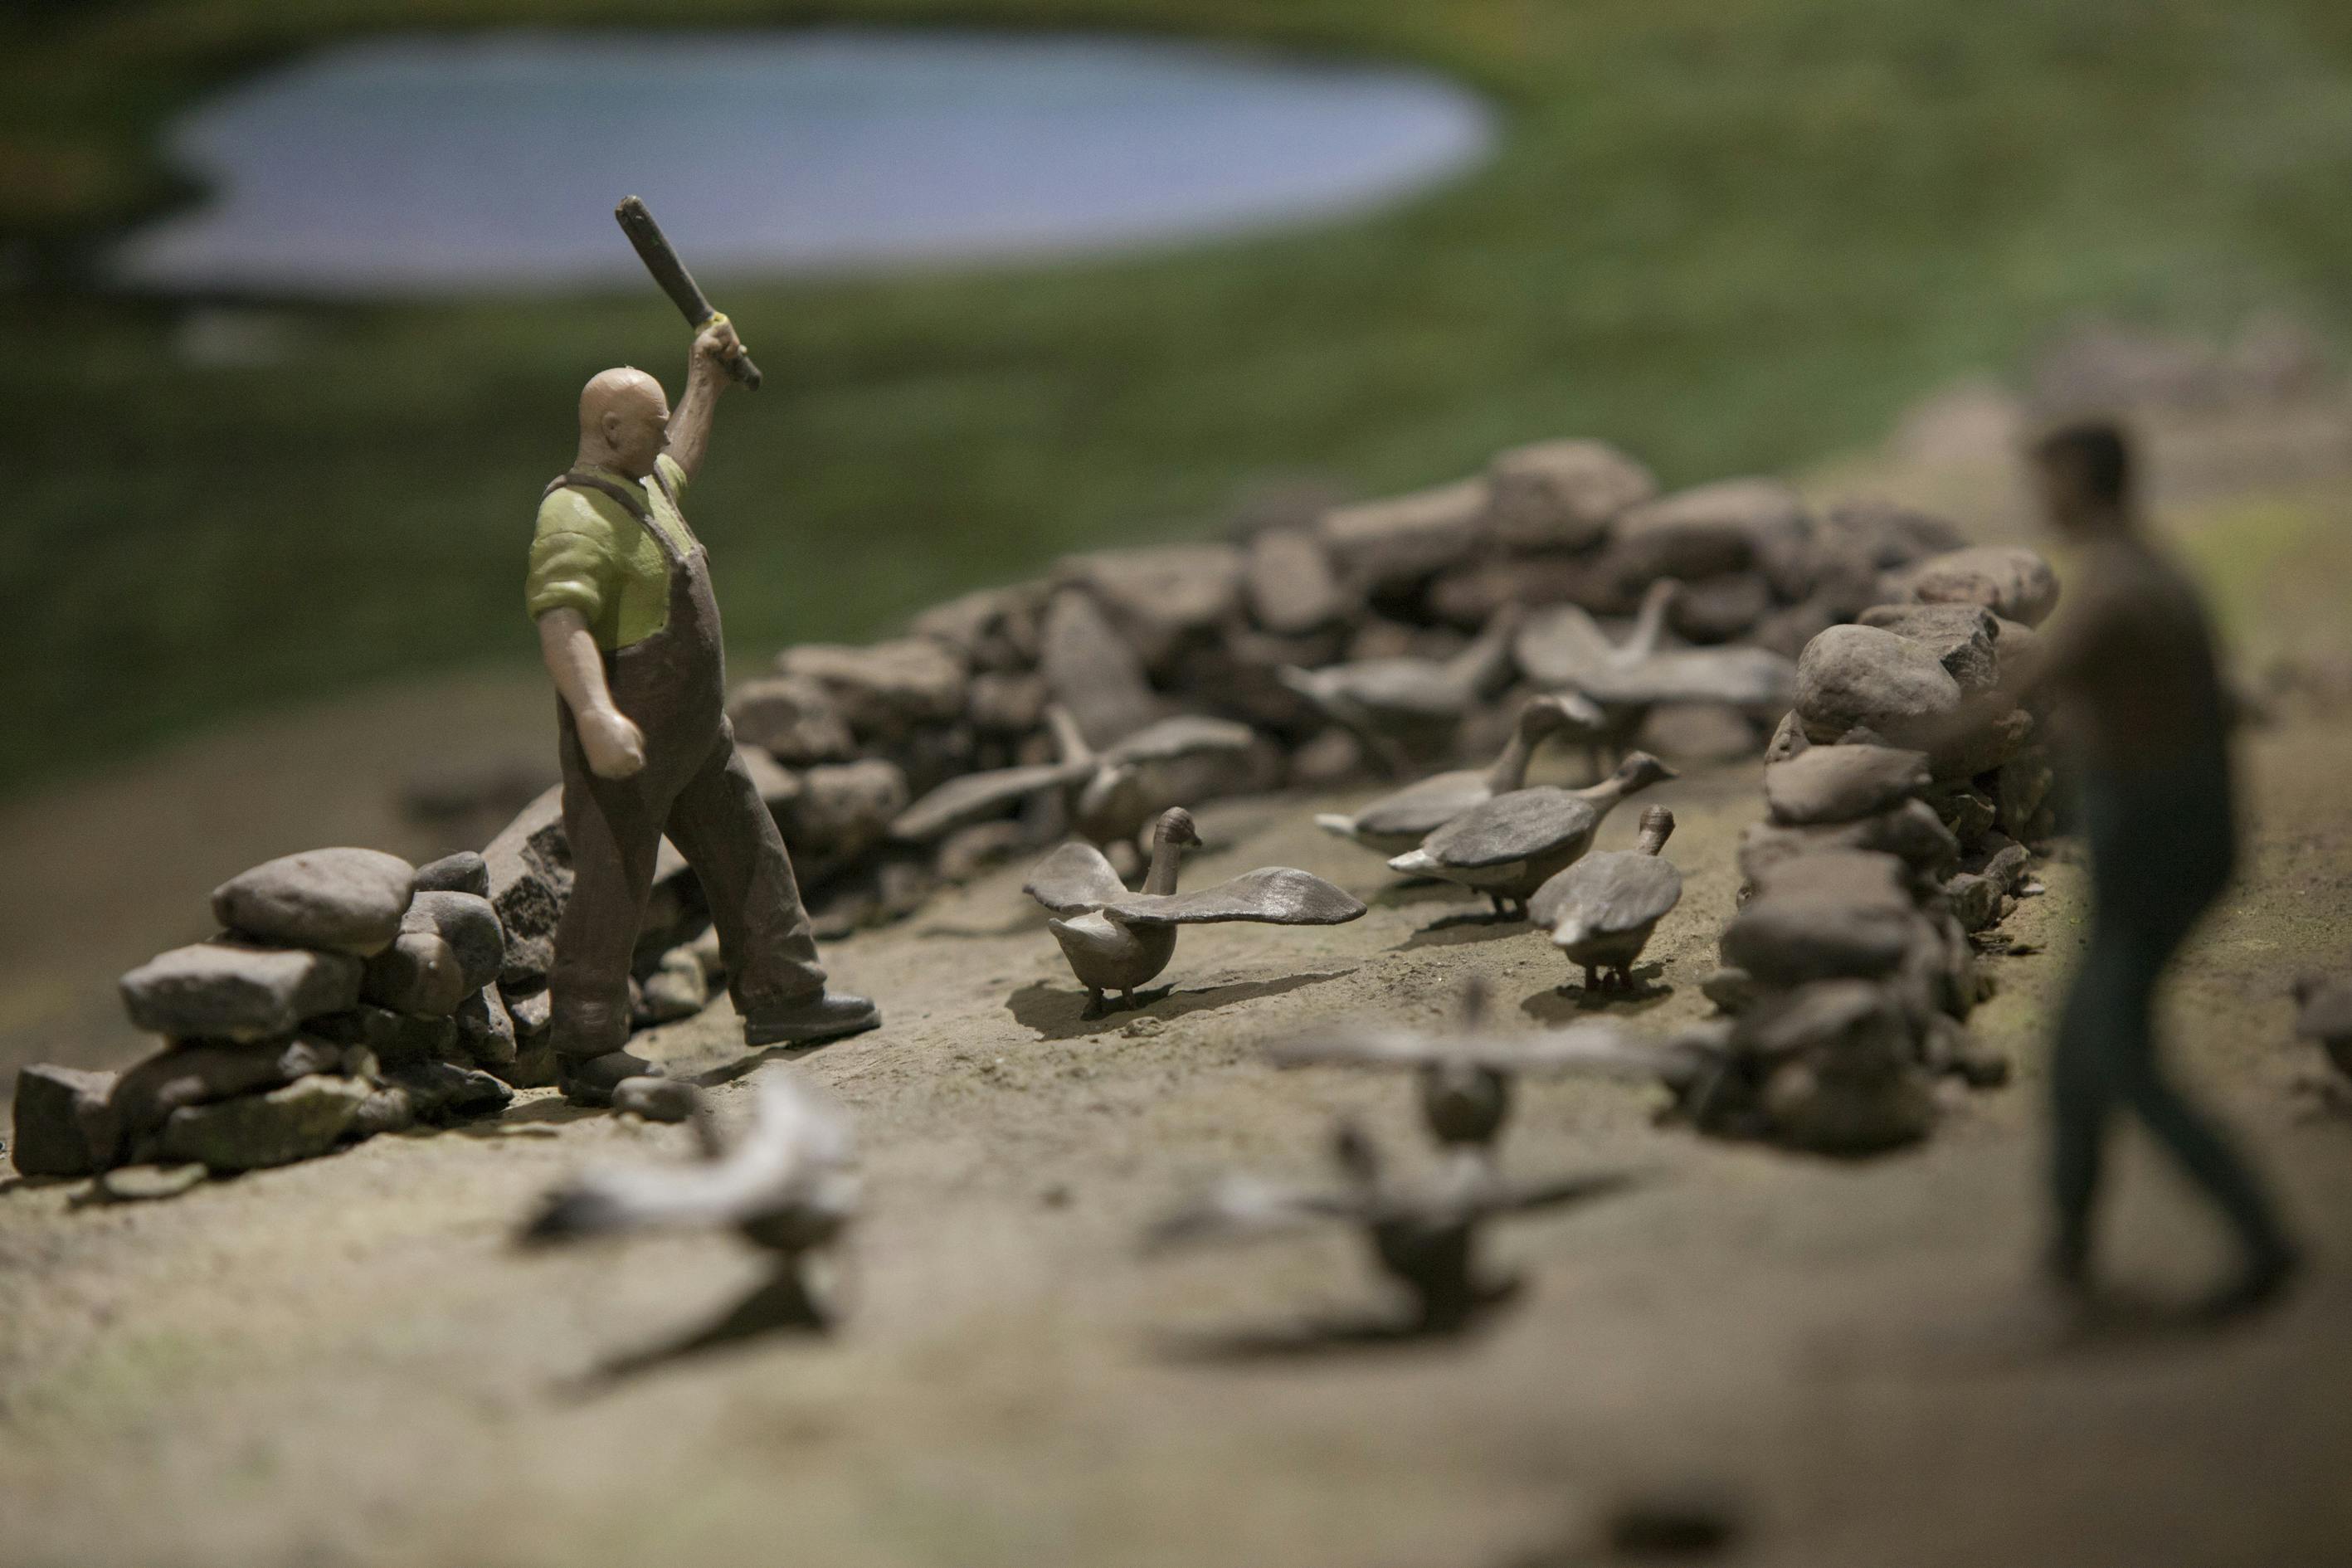 A display at the Wilderness museum, of a man who seemingly does not like ducks.